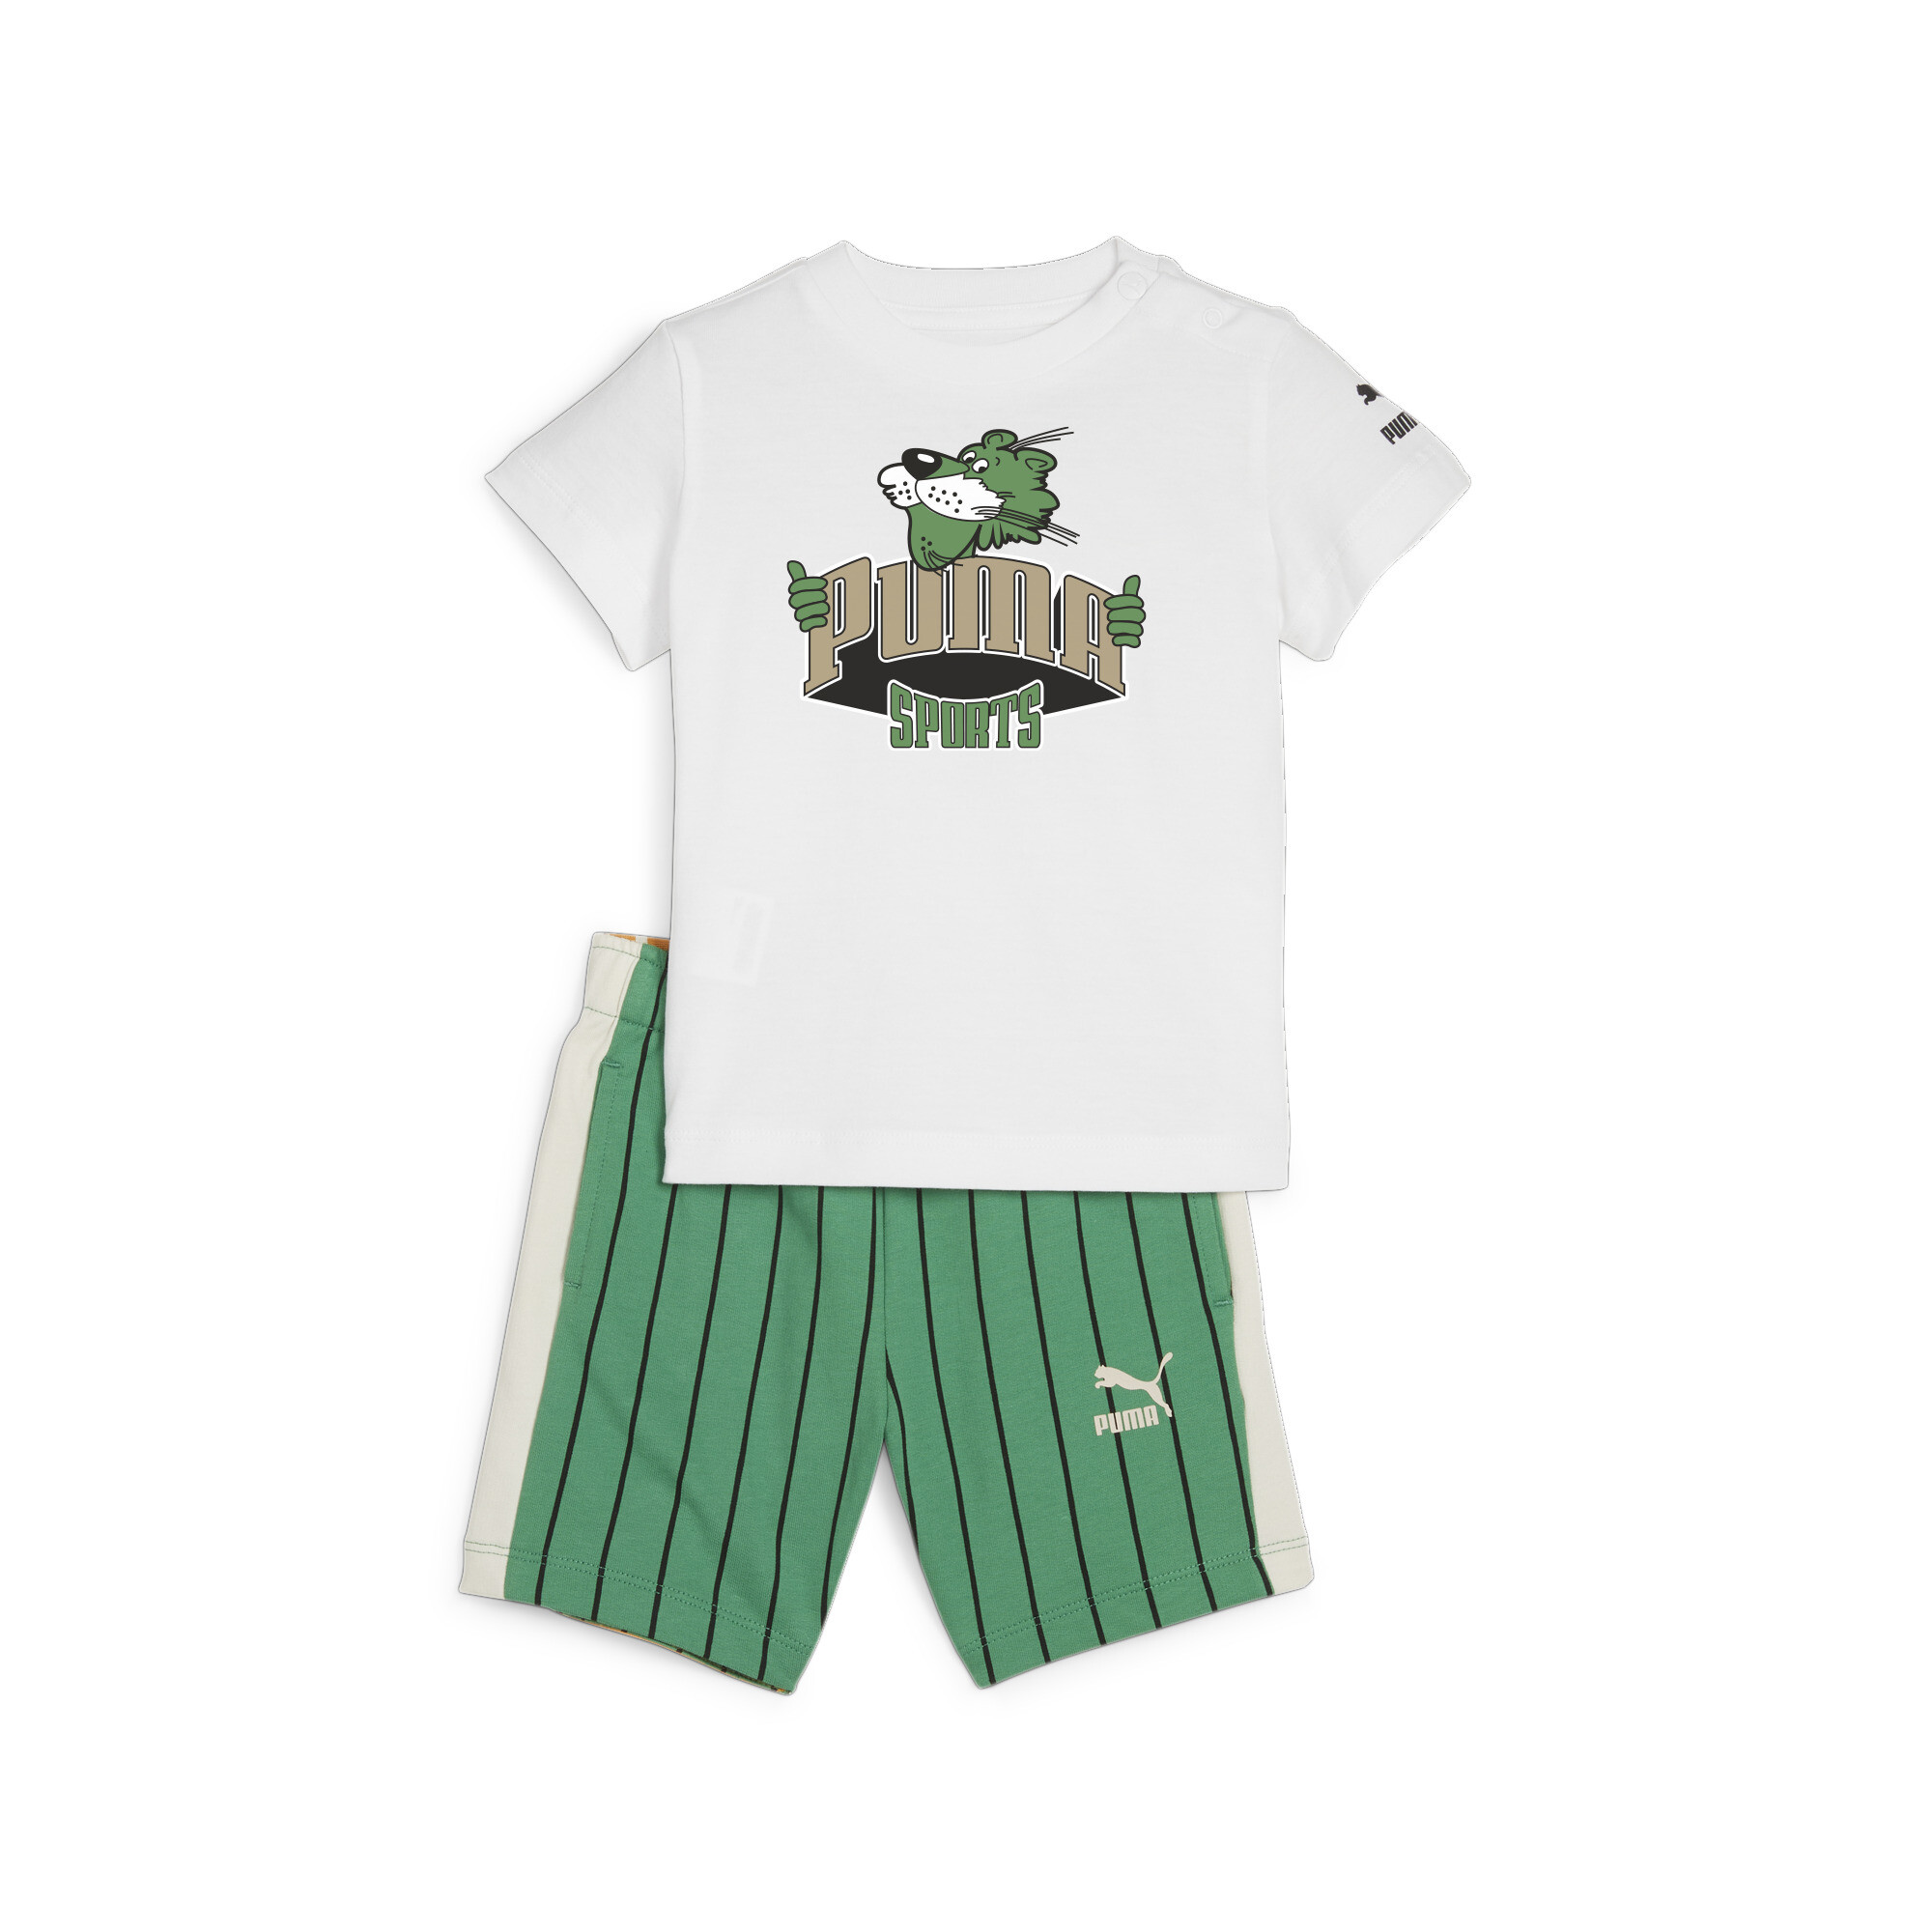 Kids' PUMA MINICATS FANBASE Toddlers' Set In White, Size 12-18 Months